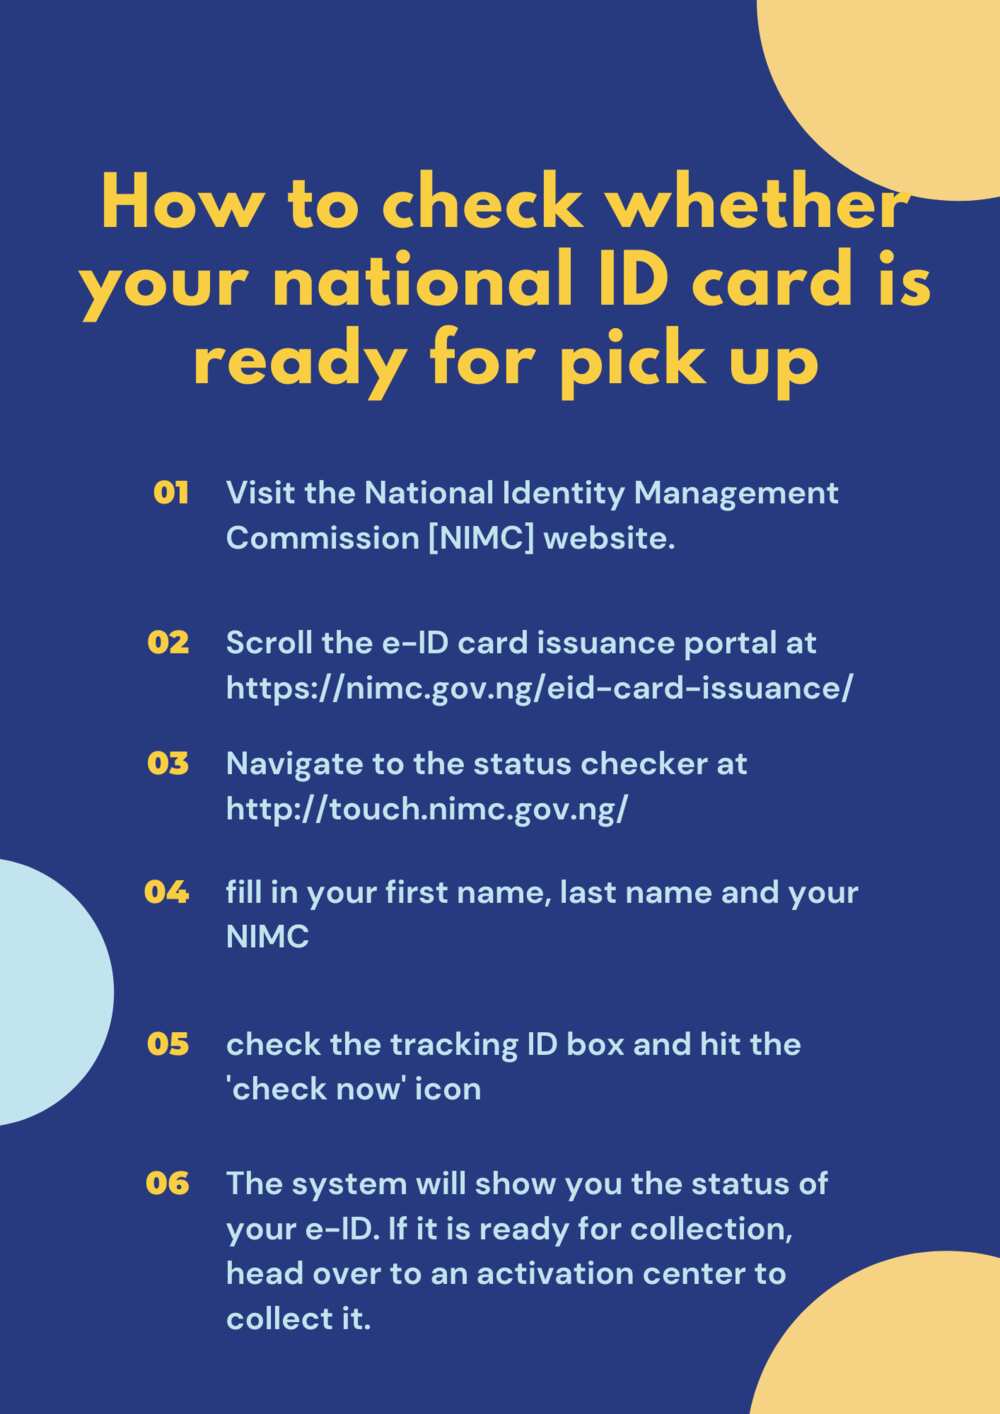 Is a national ID card the same as NIN?